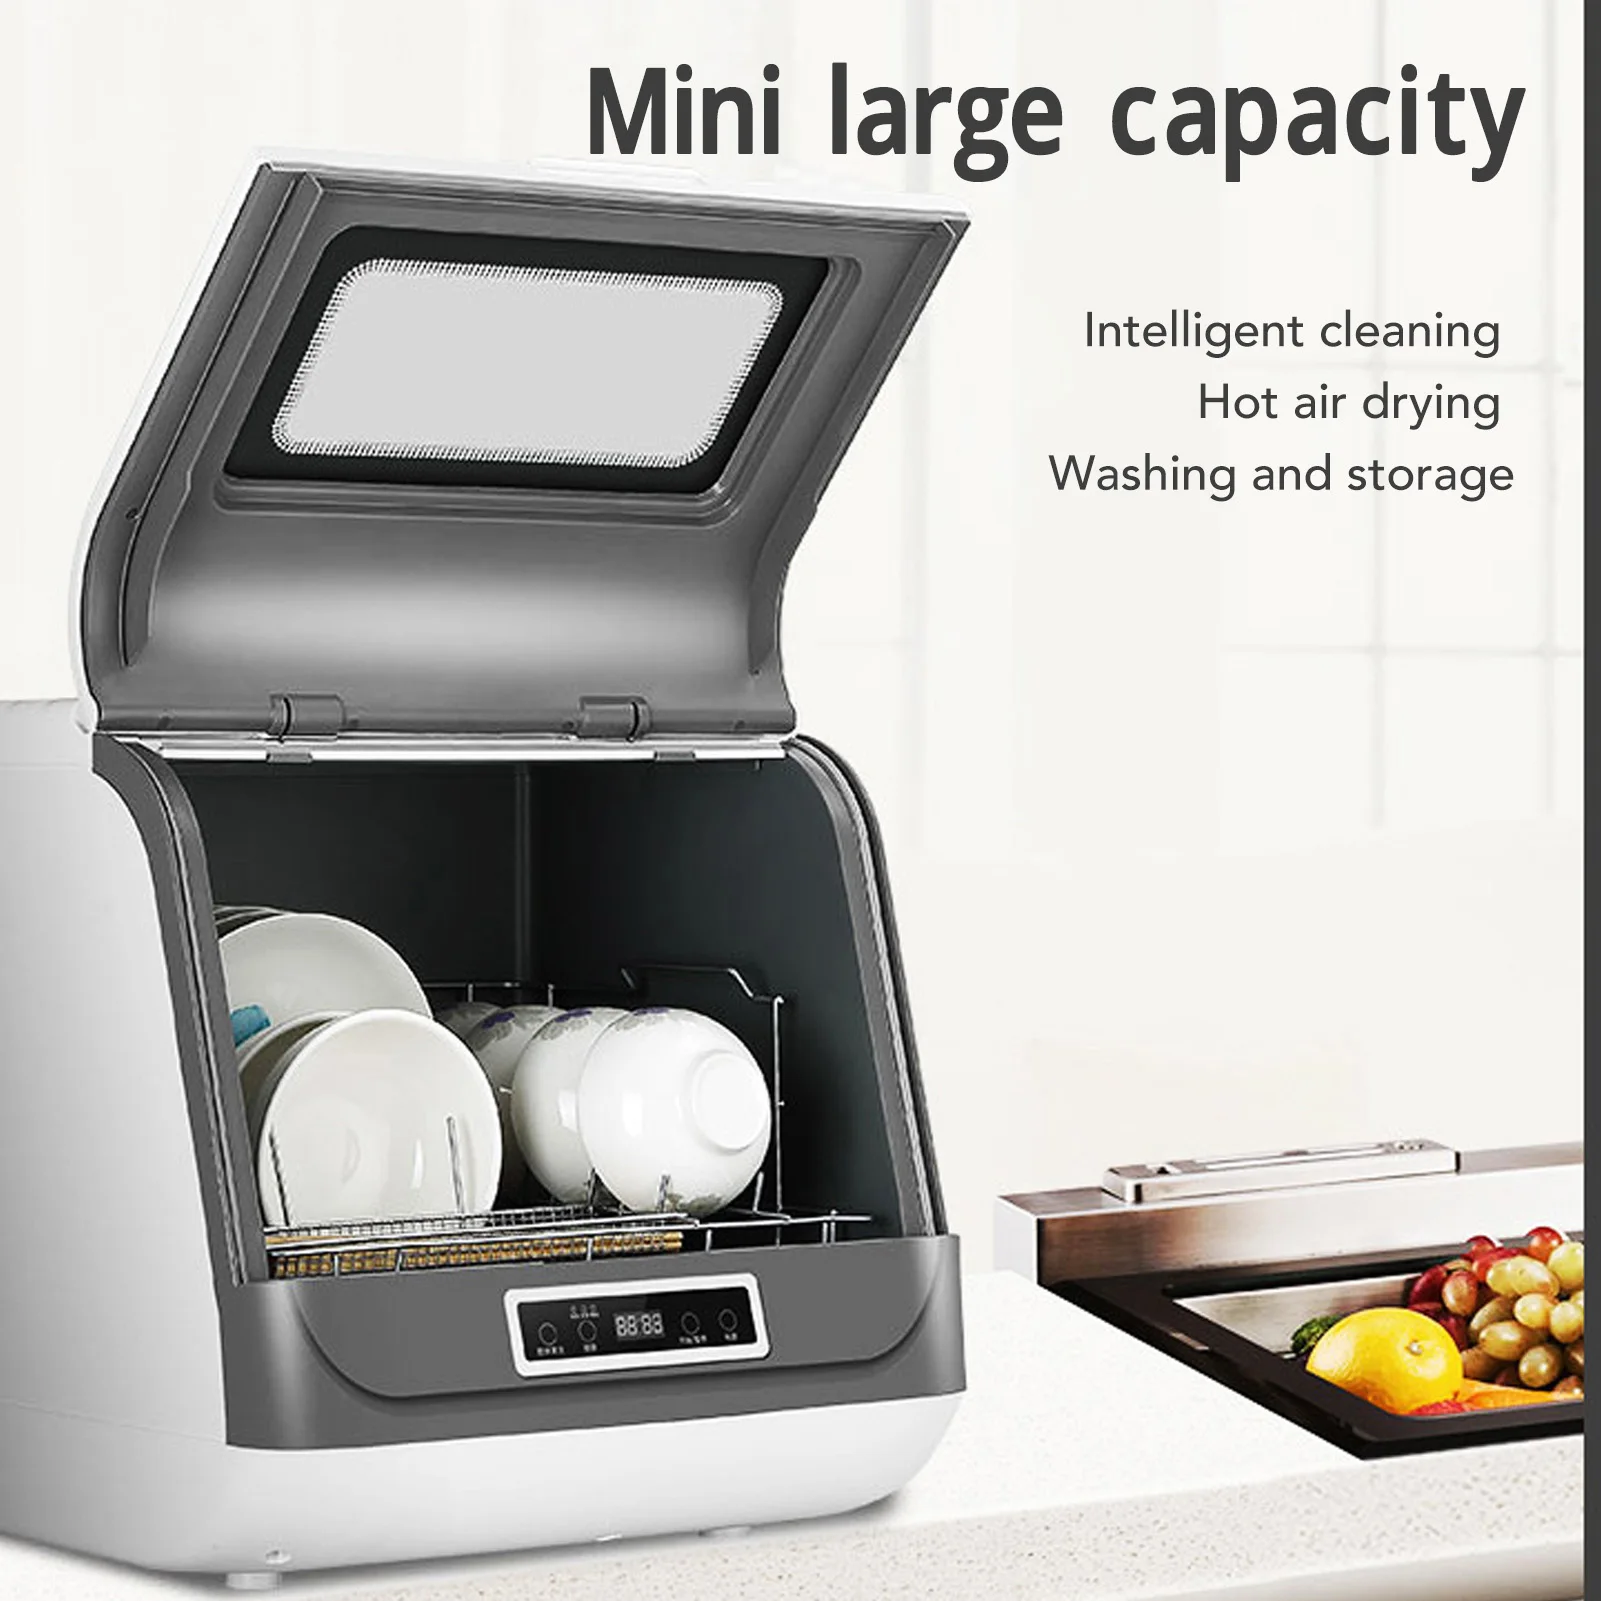 COMFEE' Portable Dishwasher, Countertop Dishwasher with 3 Place Settings,  Mini Dishwasher with More Space Inside, 6 Programs - AliExpress